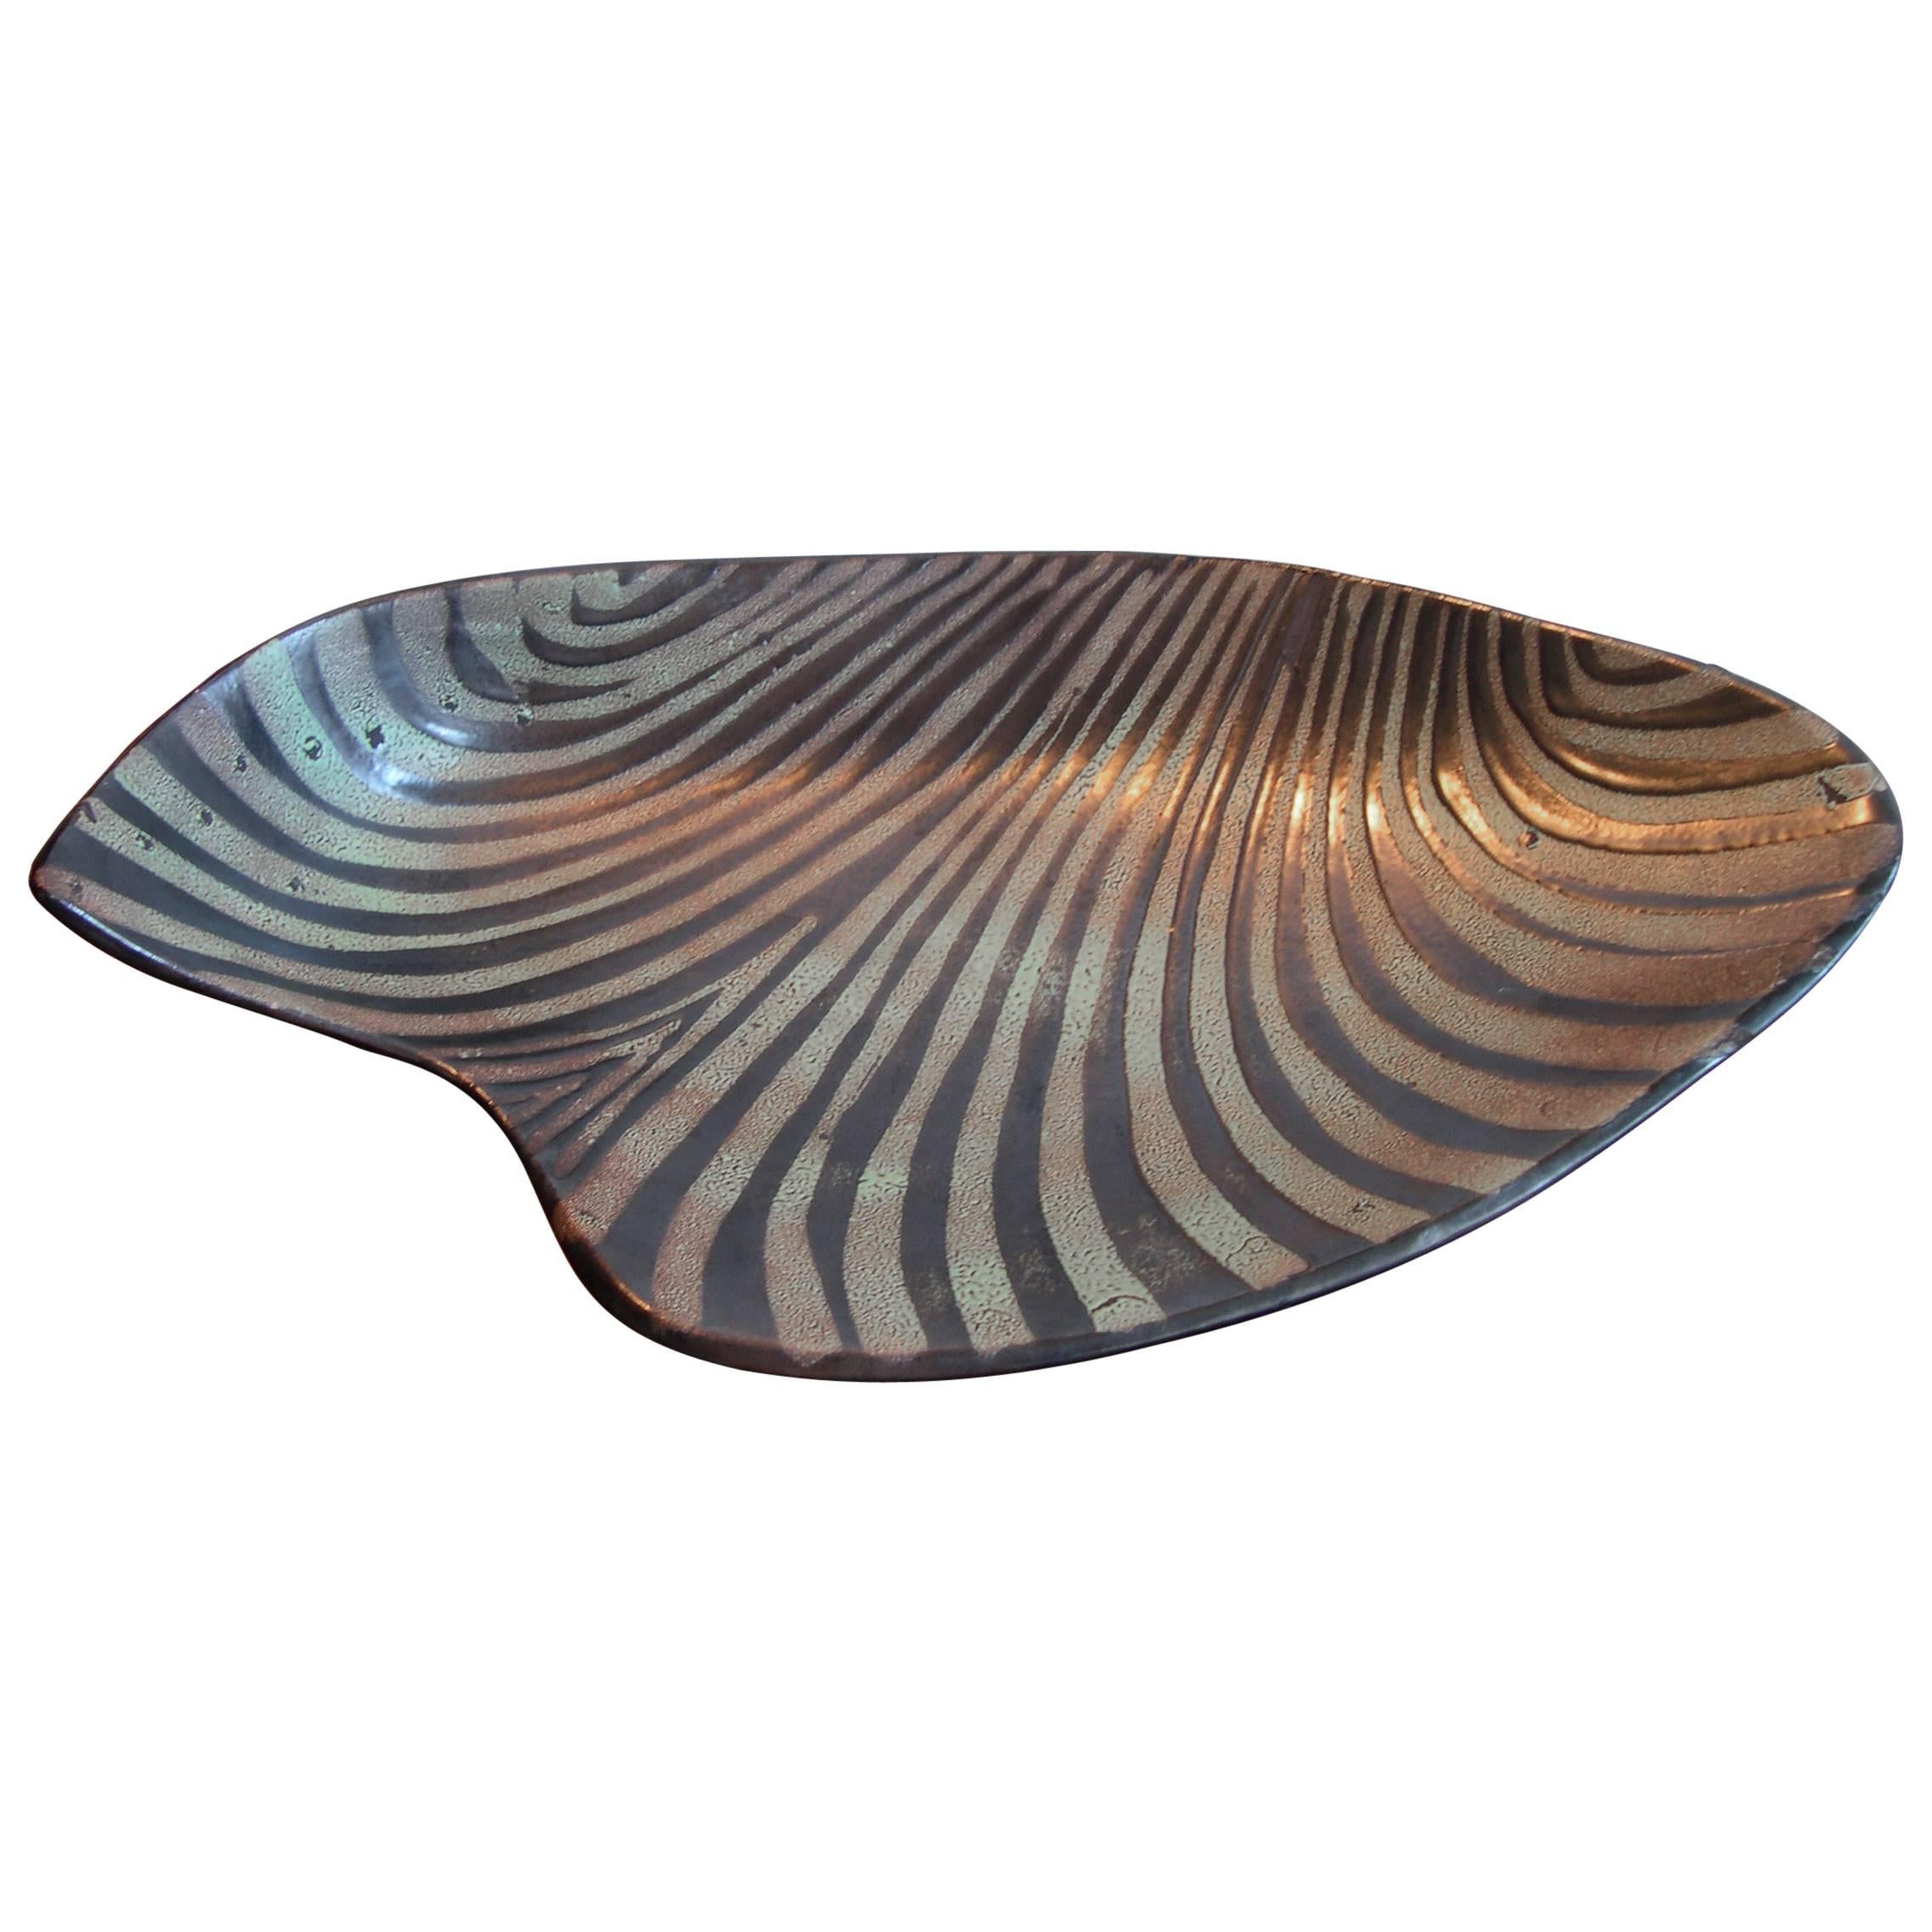 Roger Capron Vallauris Large Abstract Free-Form Ceramic "Waves" Dish, circa 1965 For Sale